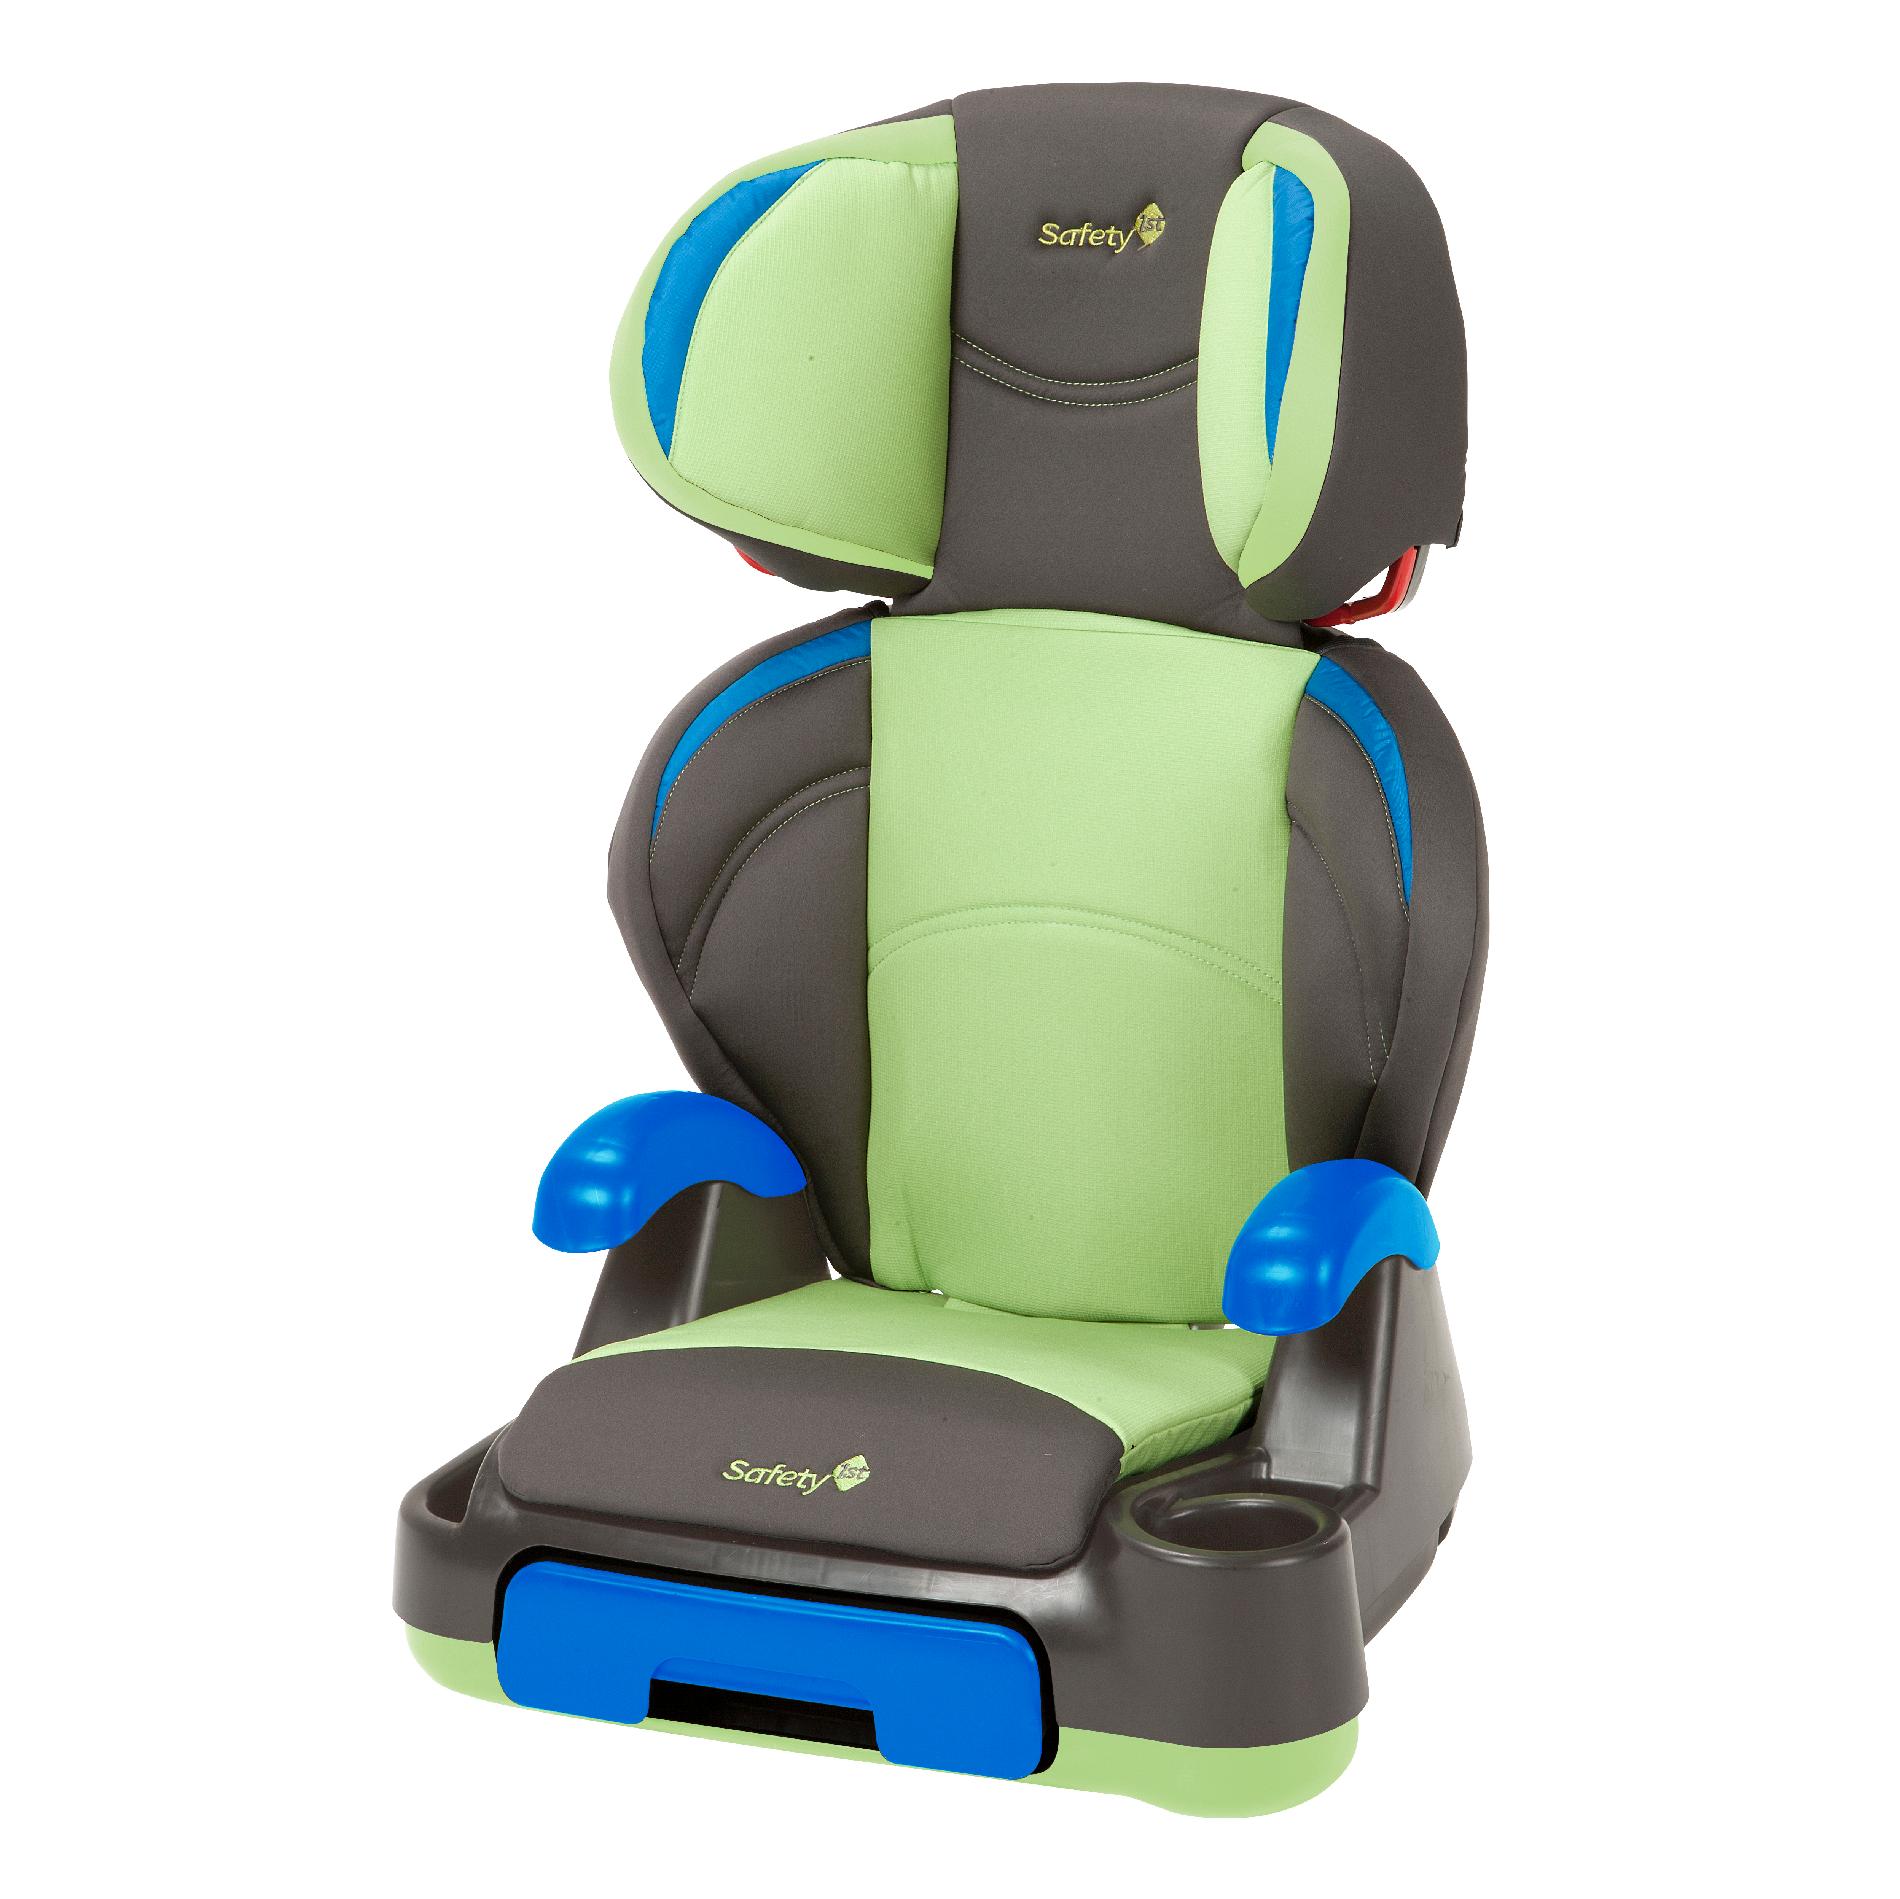 Safety 1st Store 'n Go Belt-Positioning Booster Car Seat - Adventure